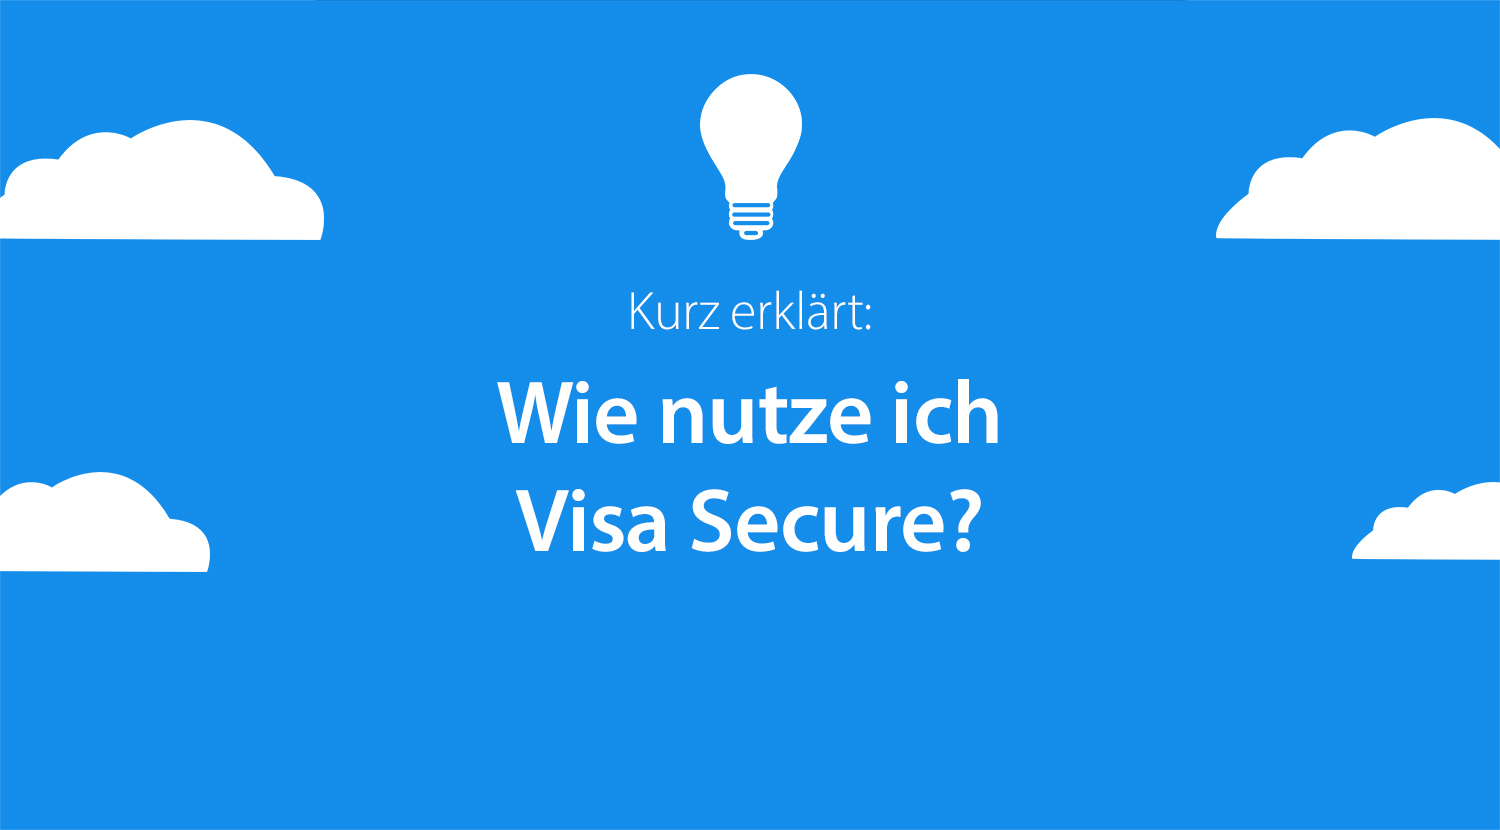 visasecure - Twitter Search / Twitter